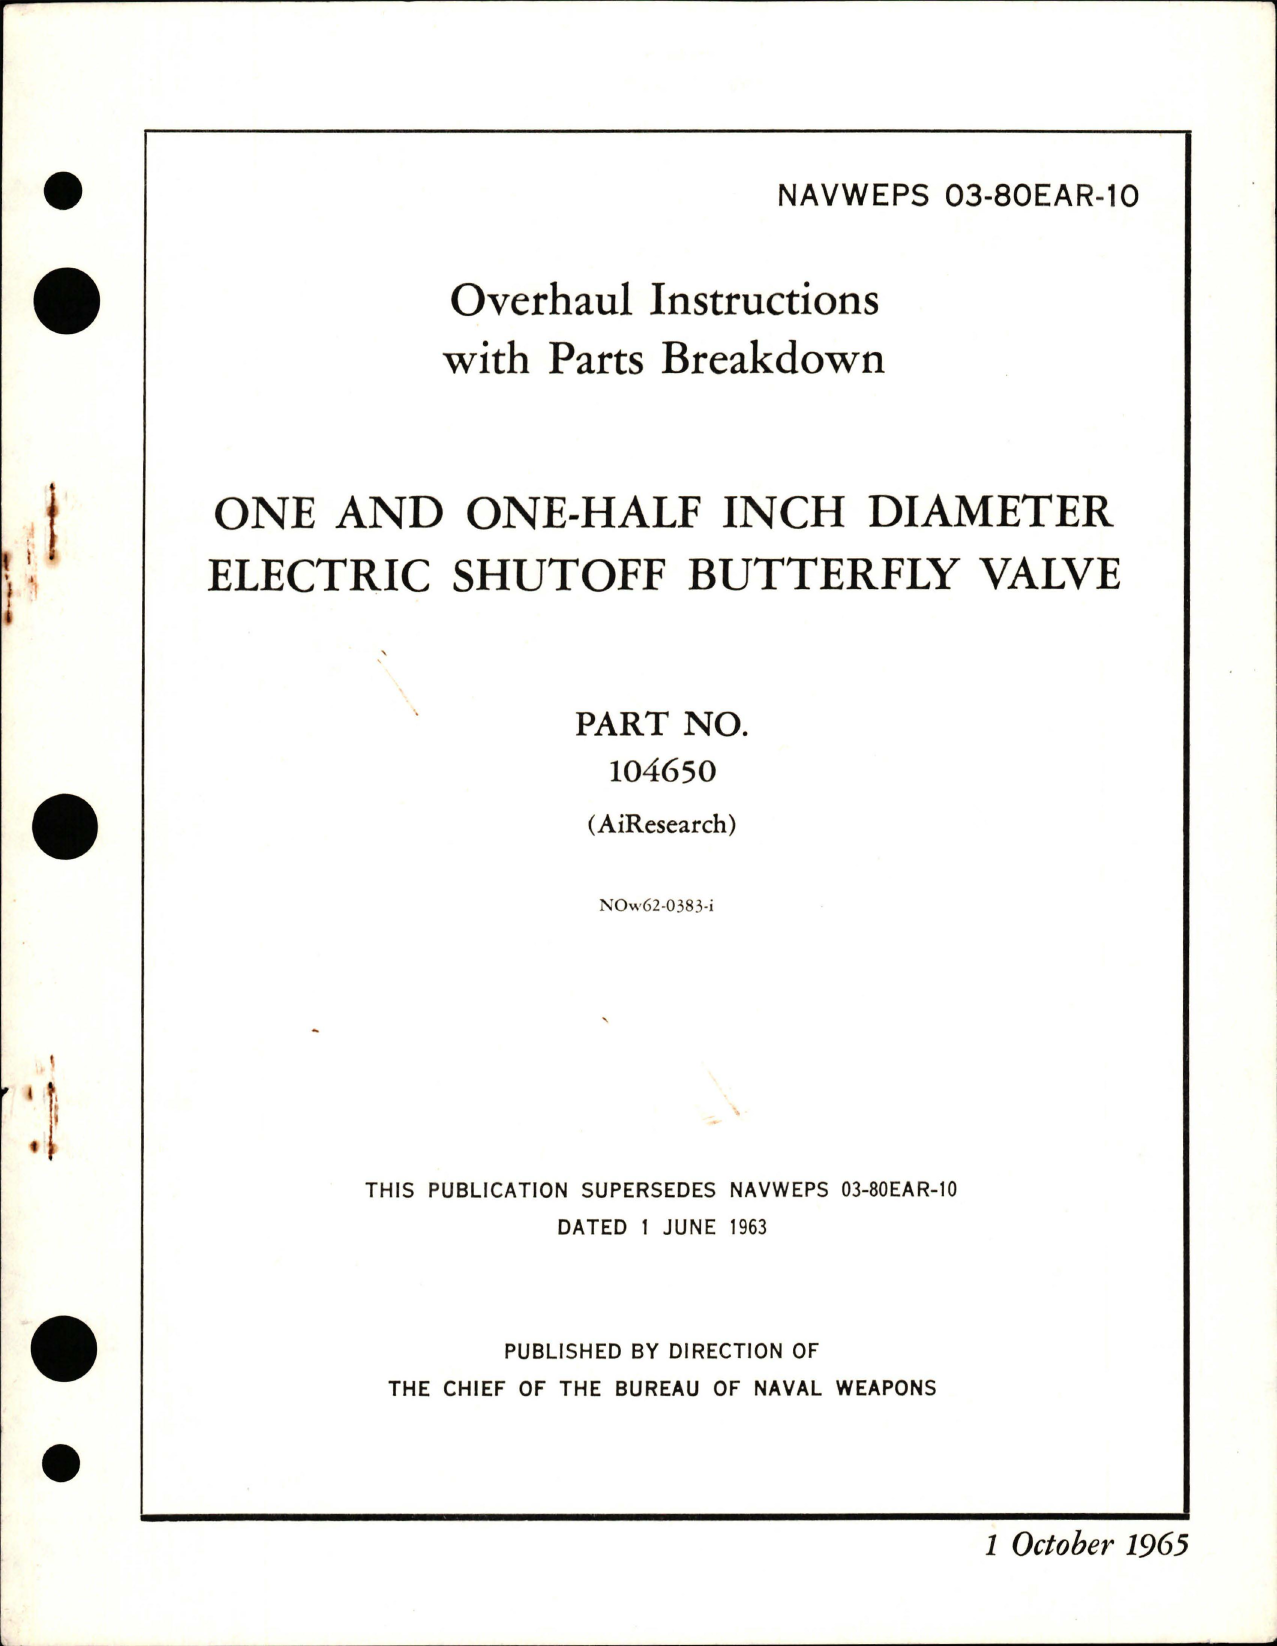 Sample page 1 from AirCorps Library document: Overhaul Instructions with Parts Breakdown for One and One-Half Inch Diameter Electric Shutoff Butterfly Valve - Part 104650